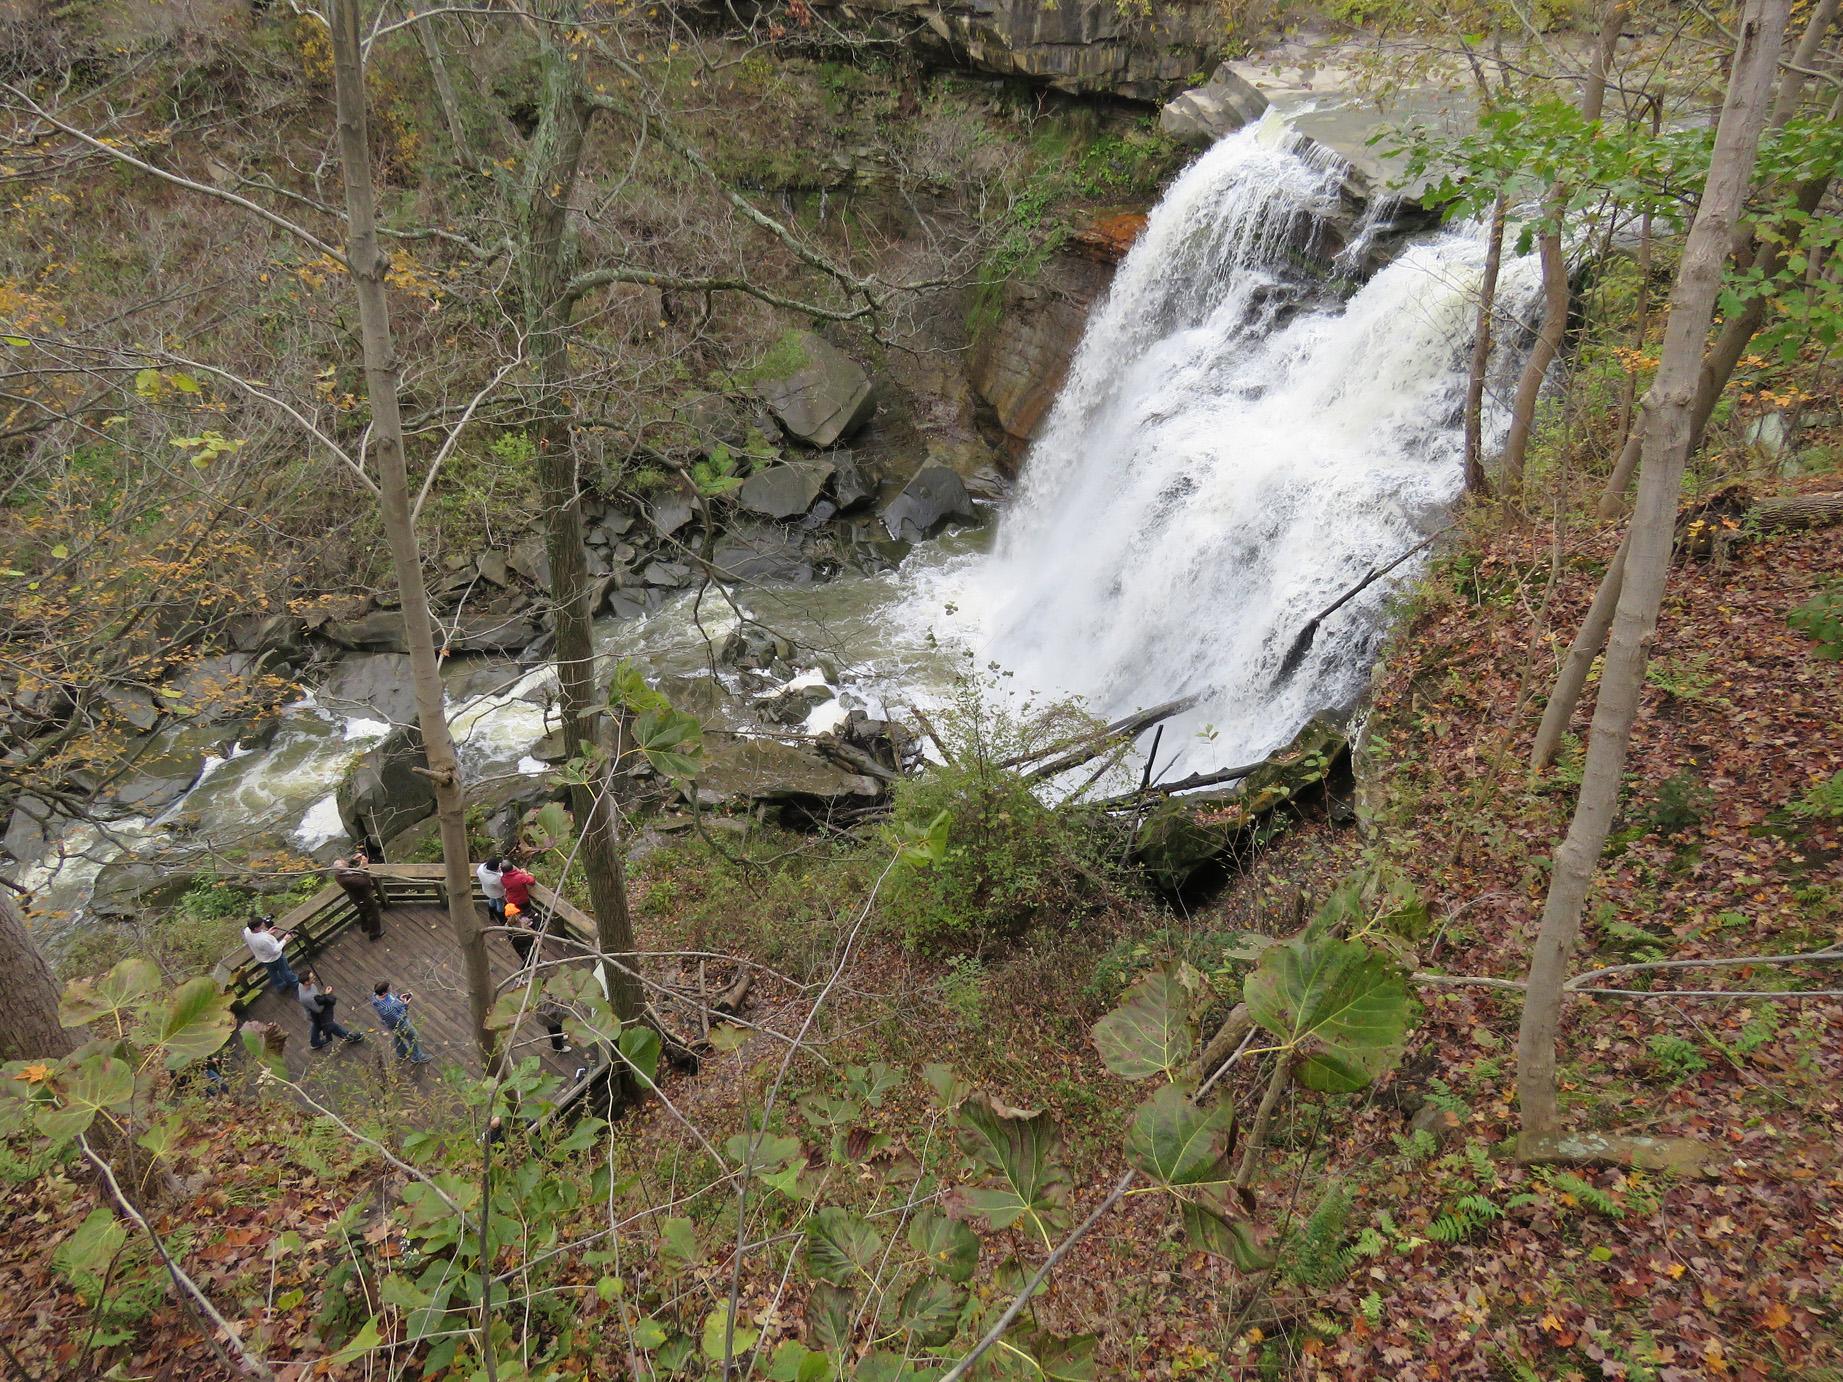 Viewed from above, people stand on a platform near frothy white water falling over a rocky ledge.